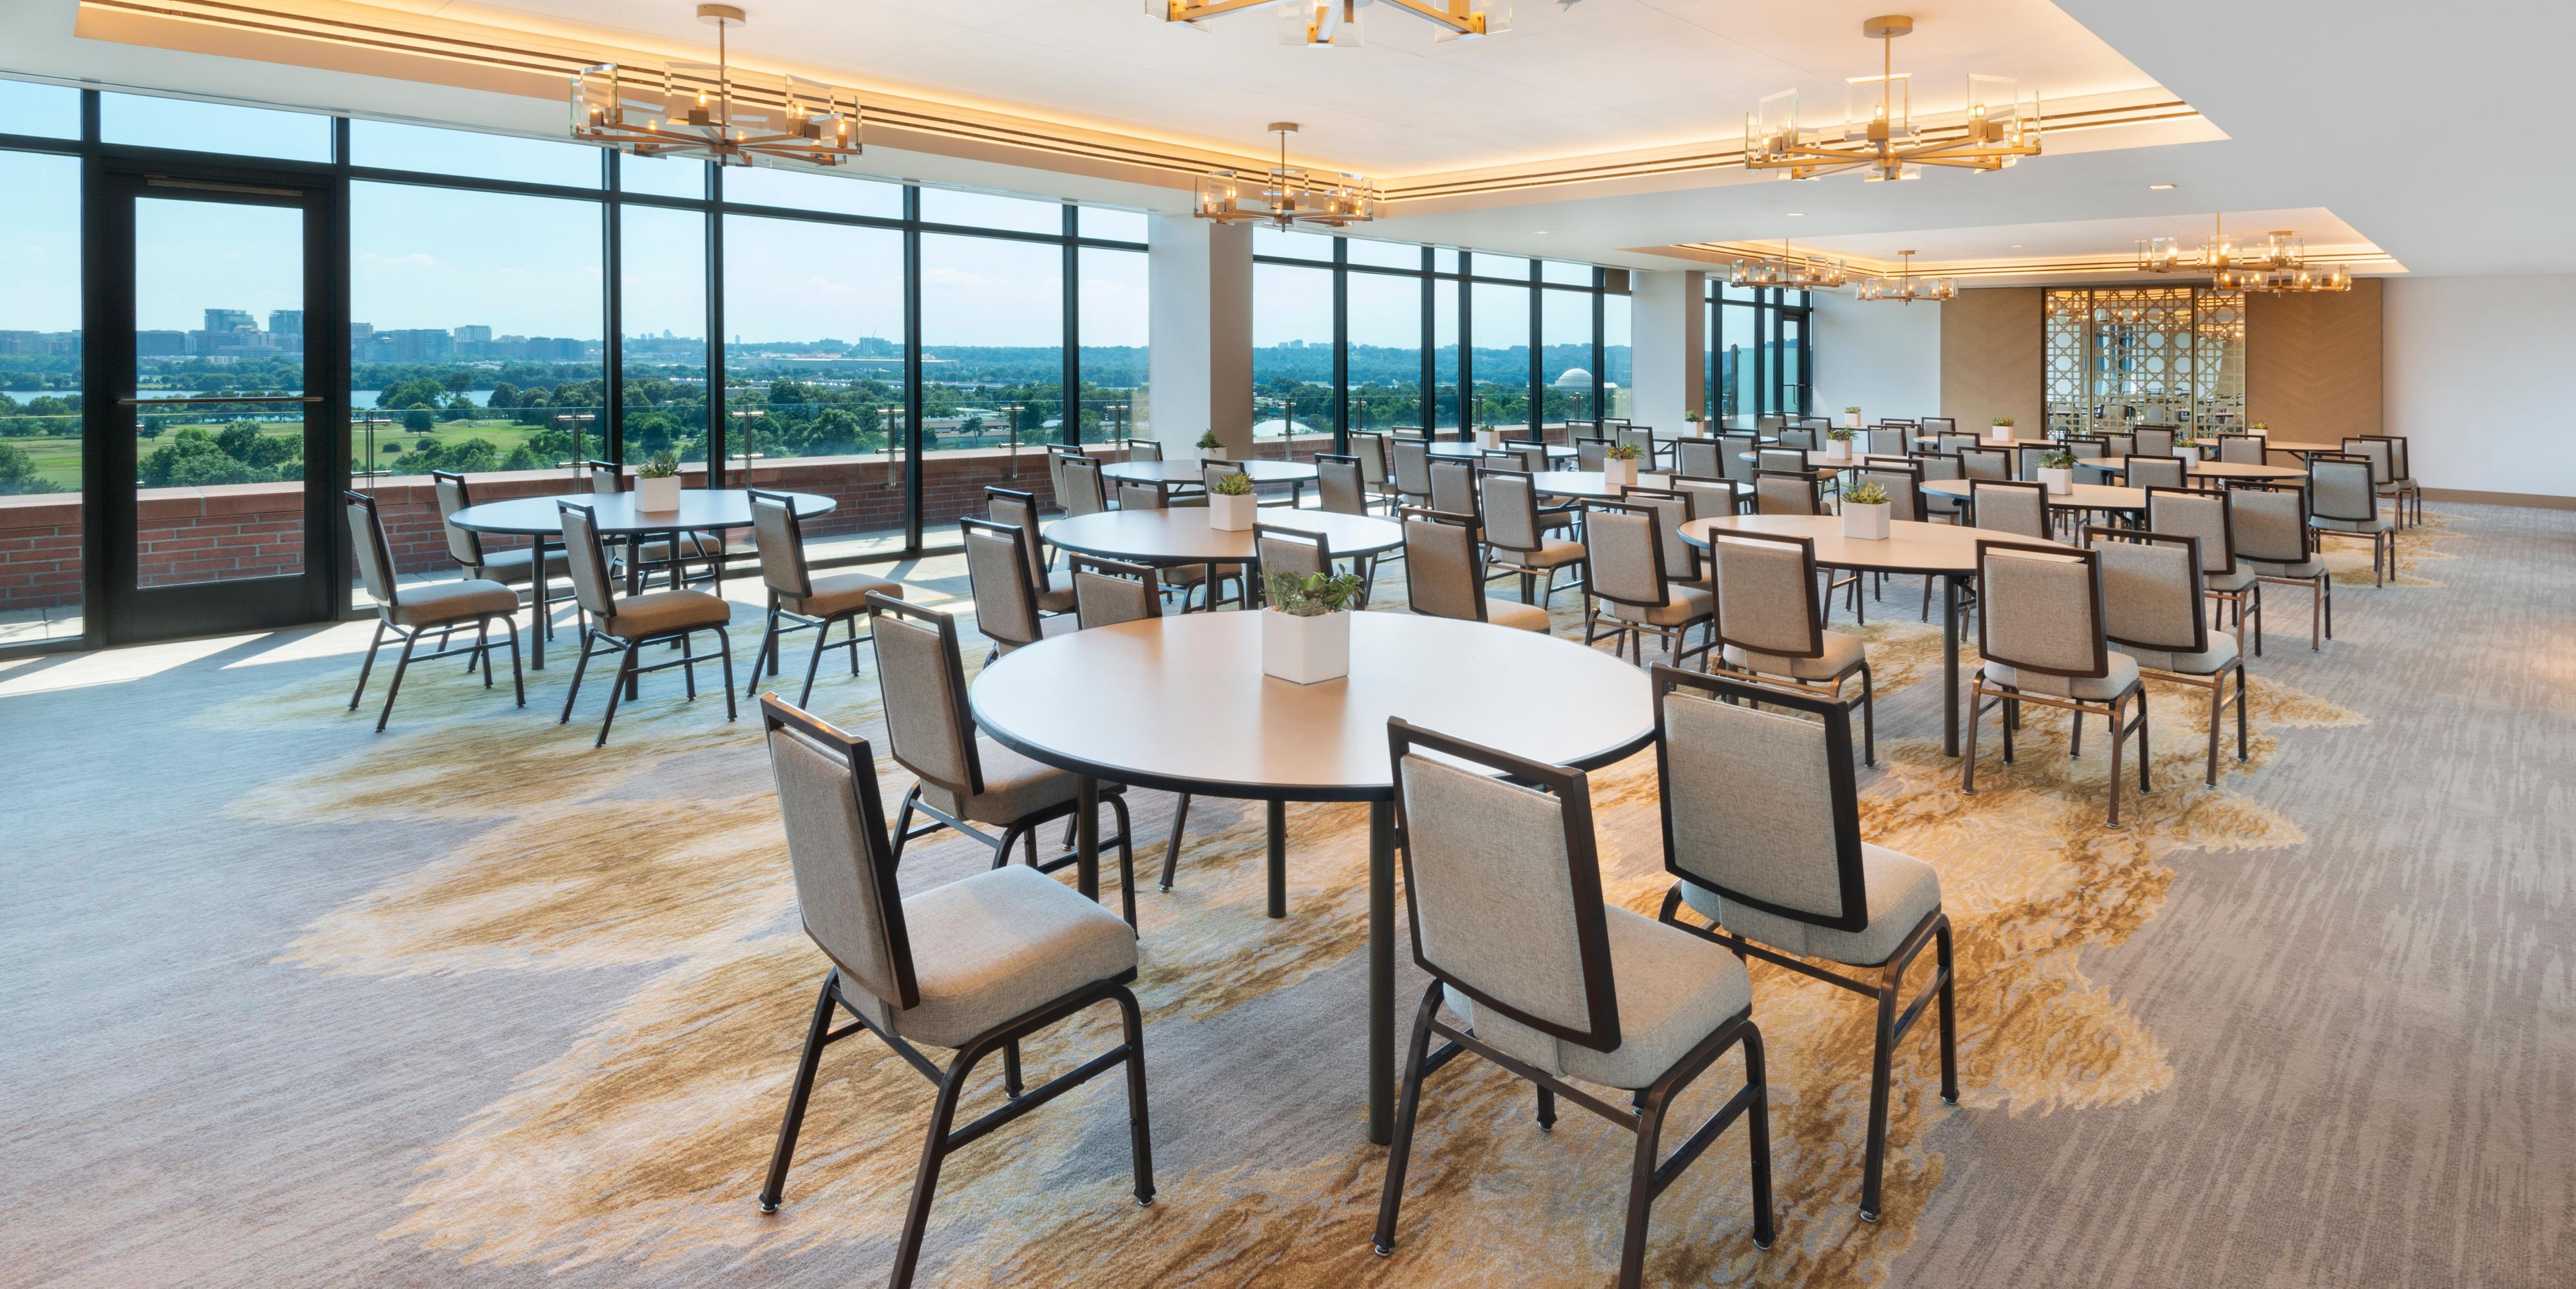 Let our dedicated teams and culinary experts work to customize your event.  From waterside cocktail parties to theater-style seating for 600, we can accommodate your guests and ensure a successful meeting or milestone event. 